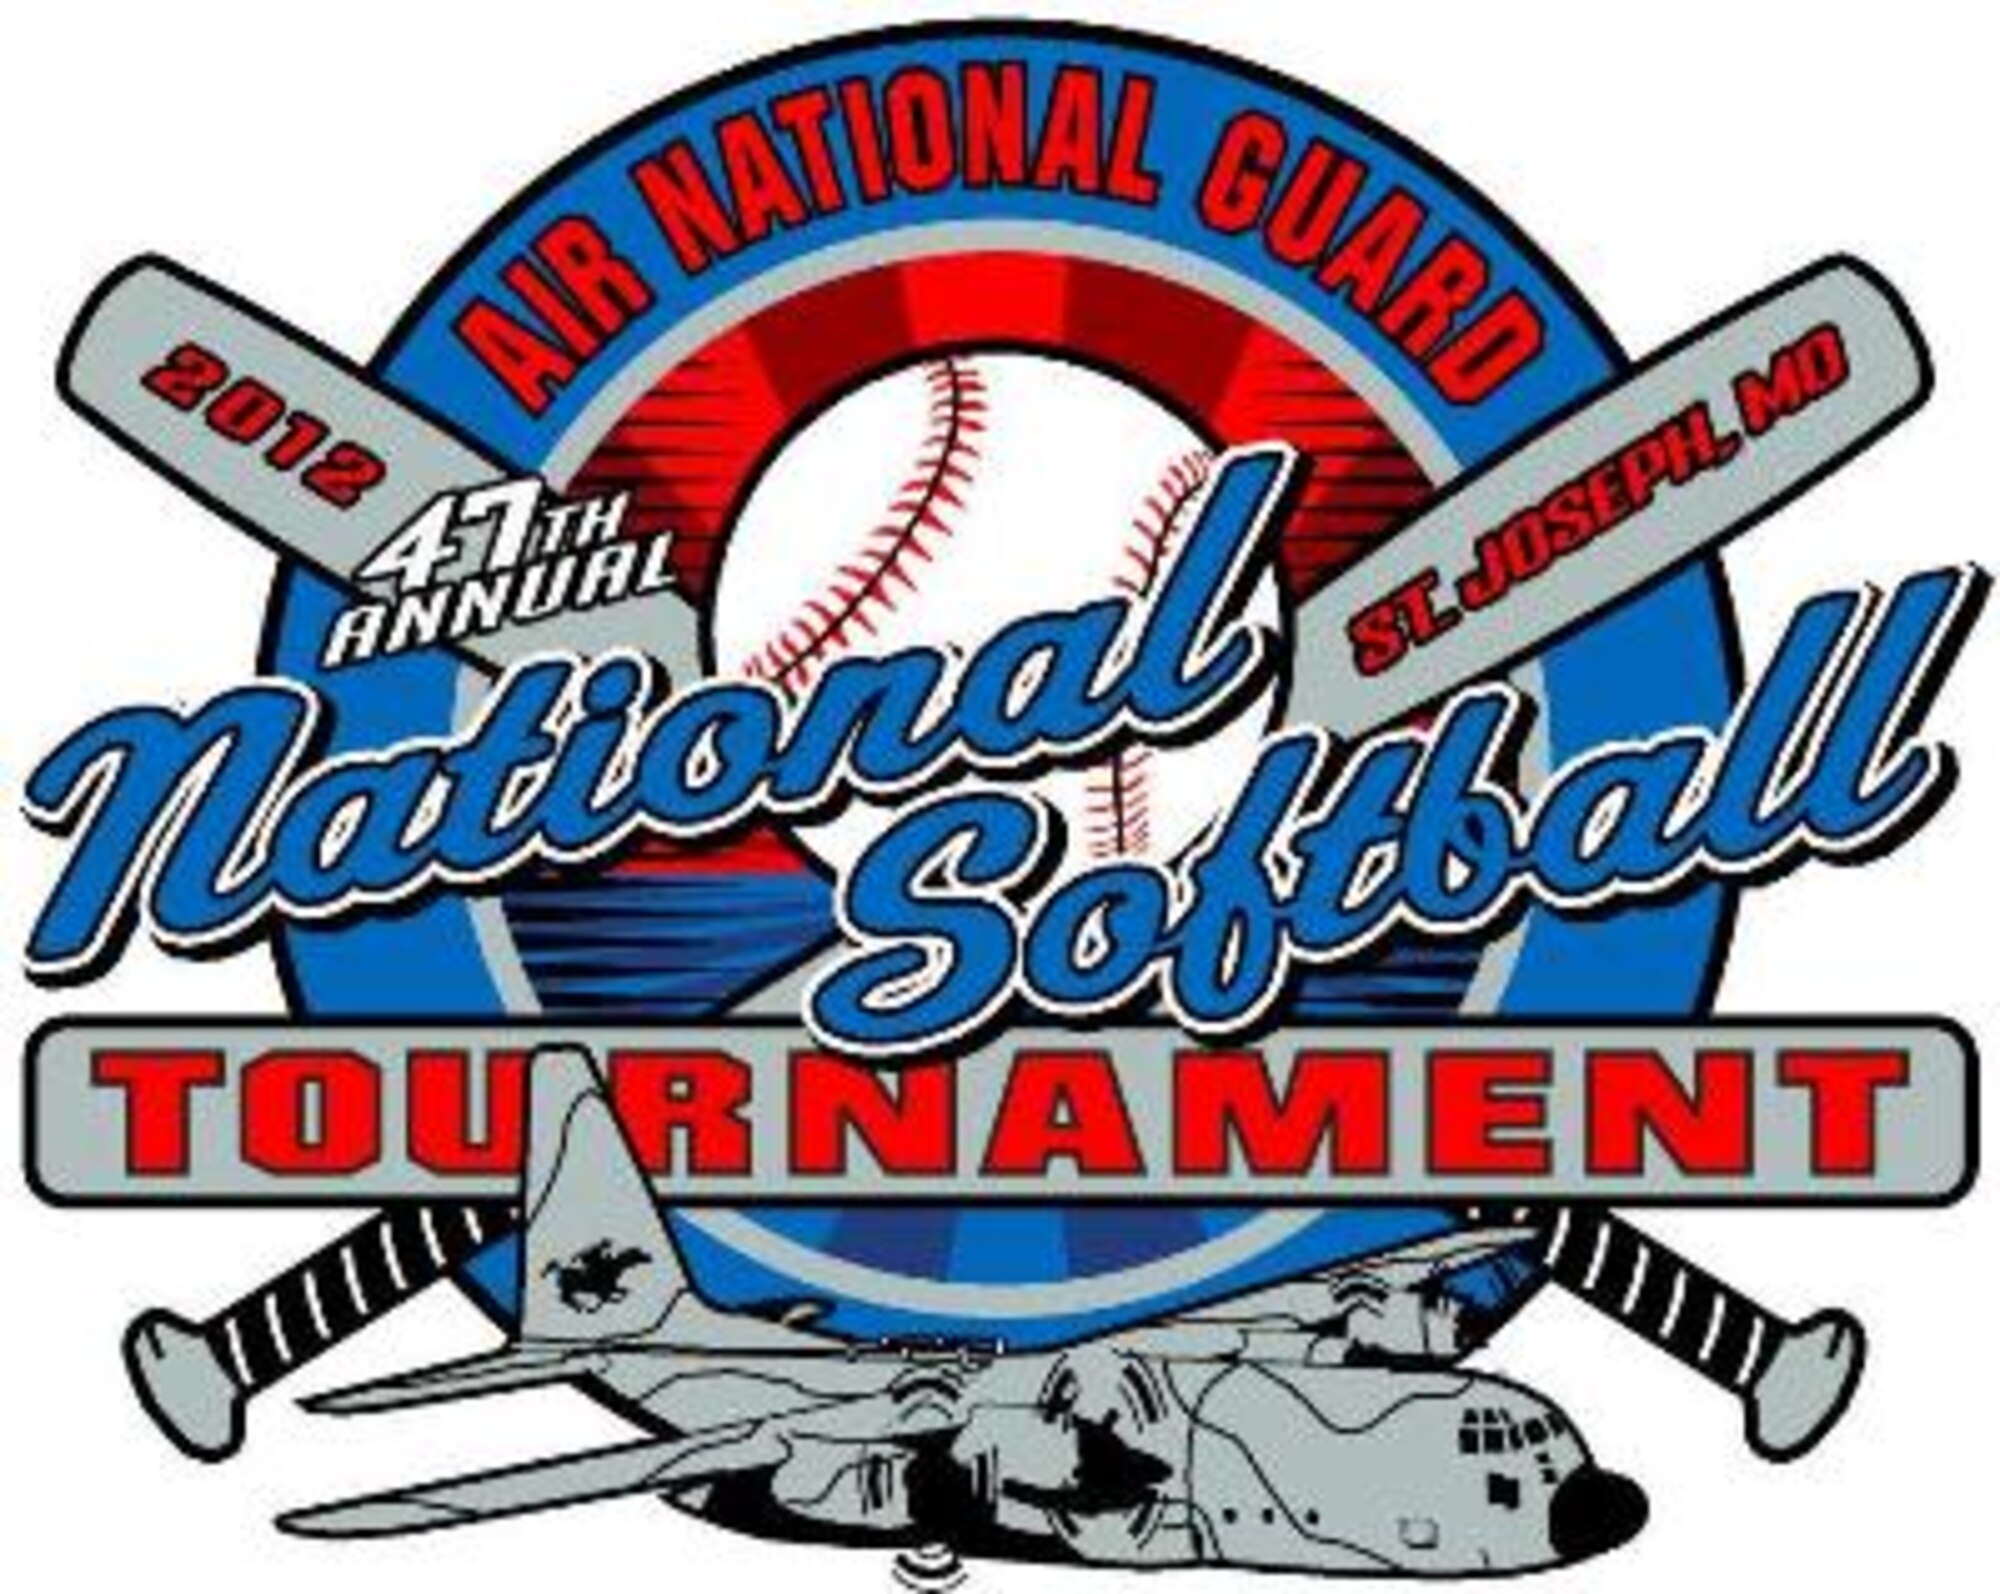 The Air National Guard 47th Annual Softball Tournament is scheduled August 15-18 in St. Joseph, Mo.